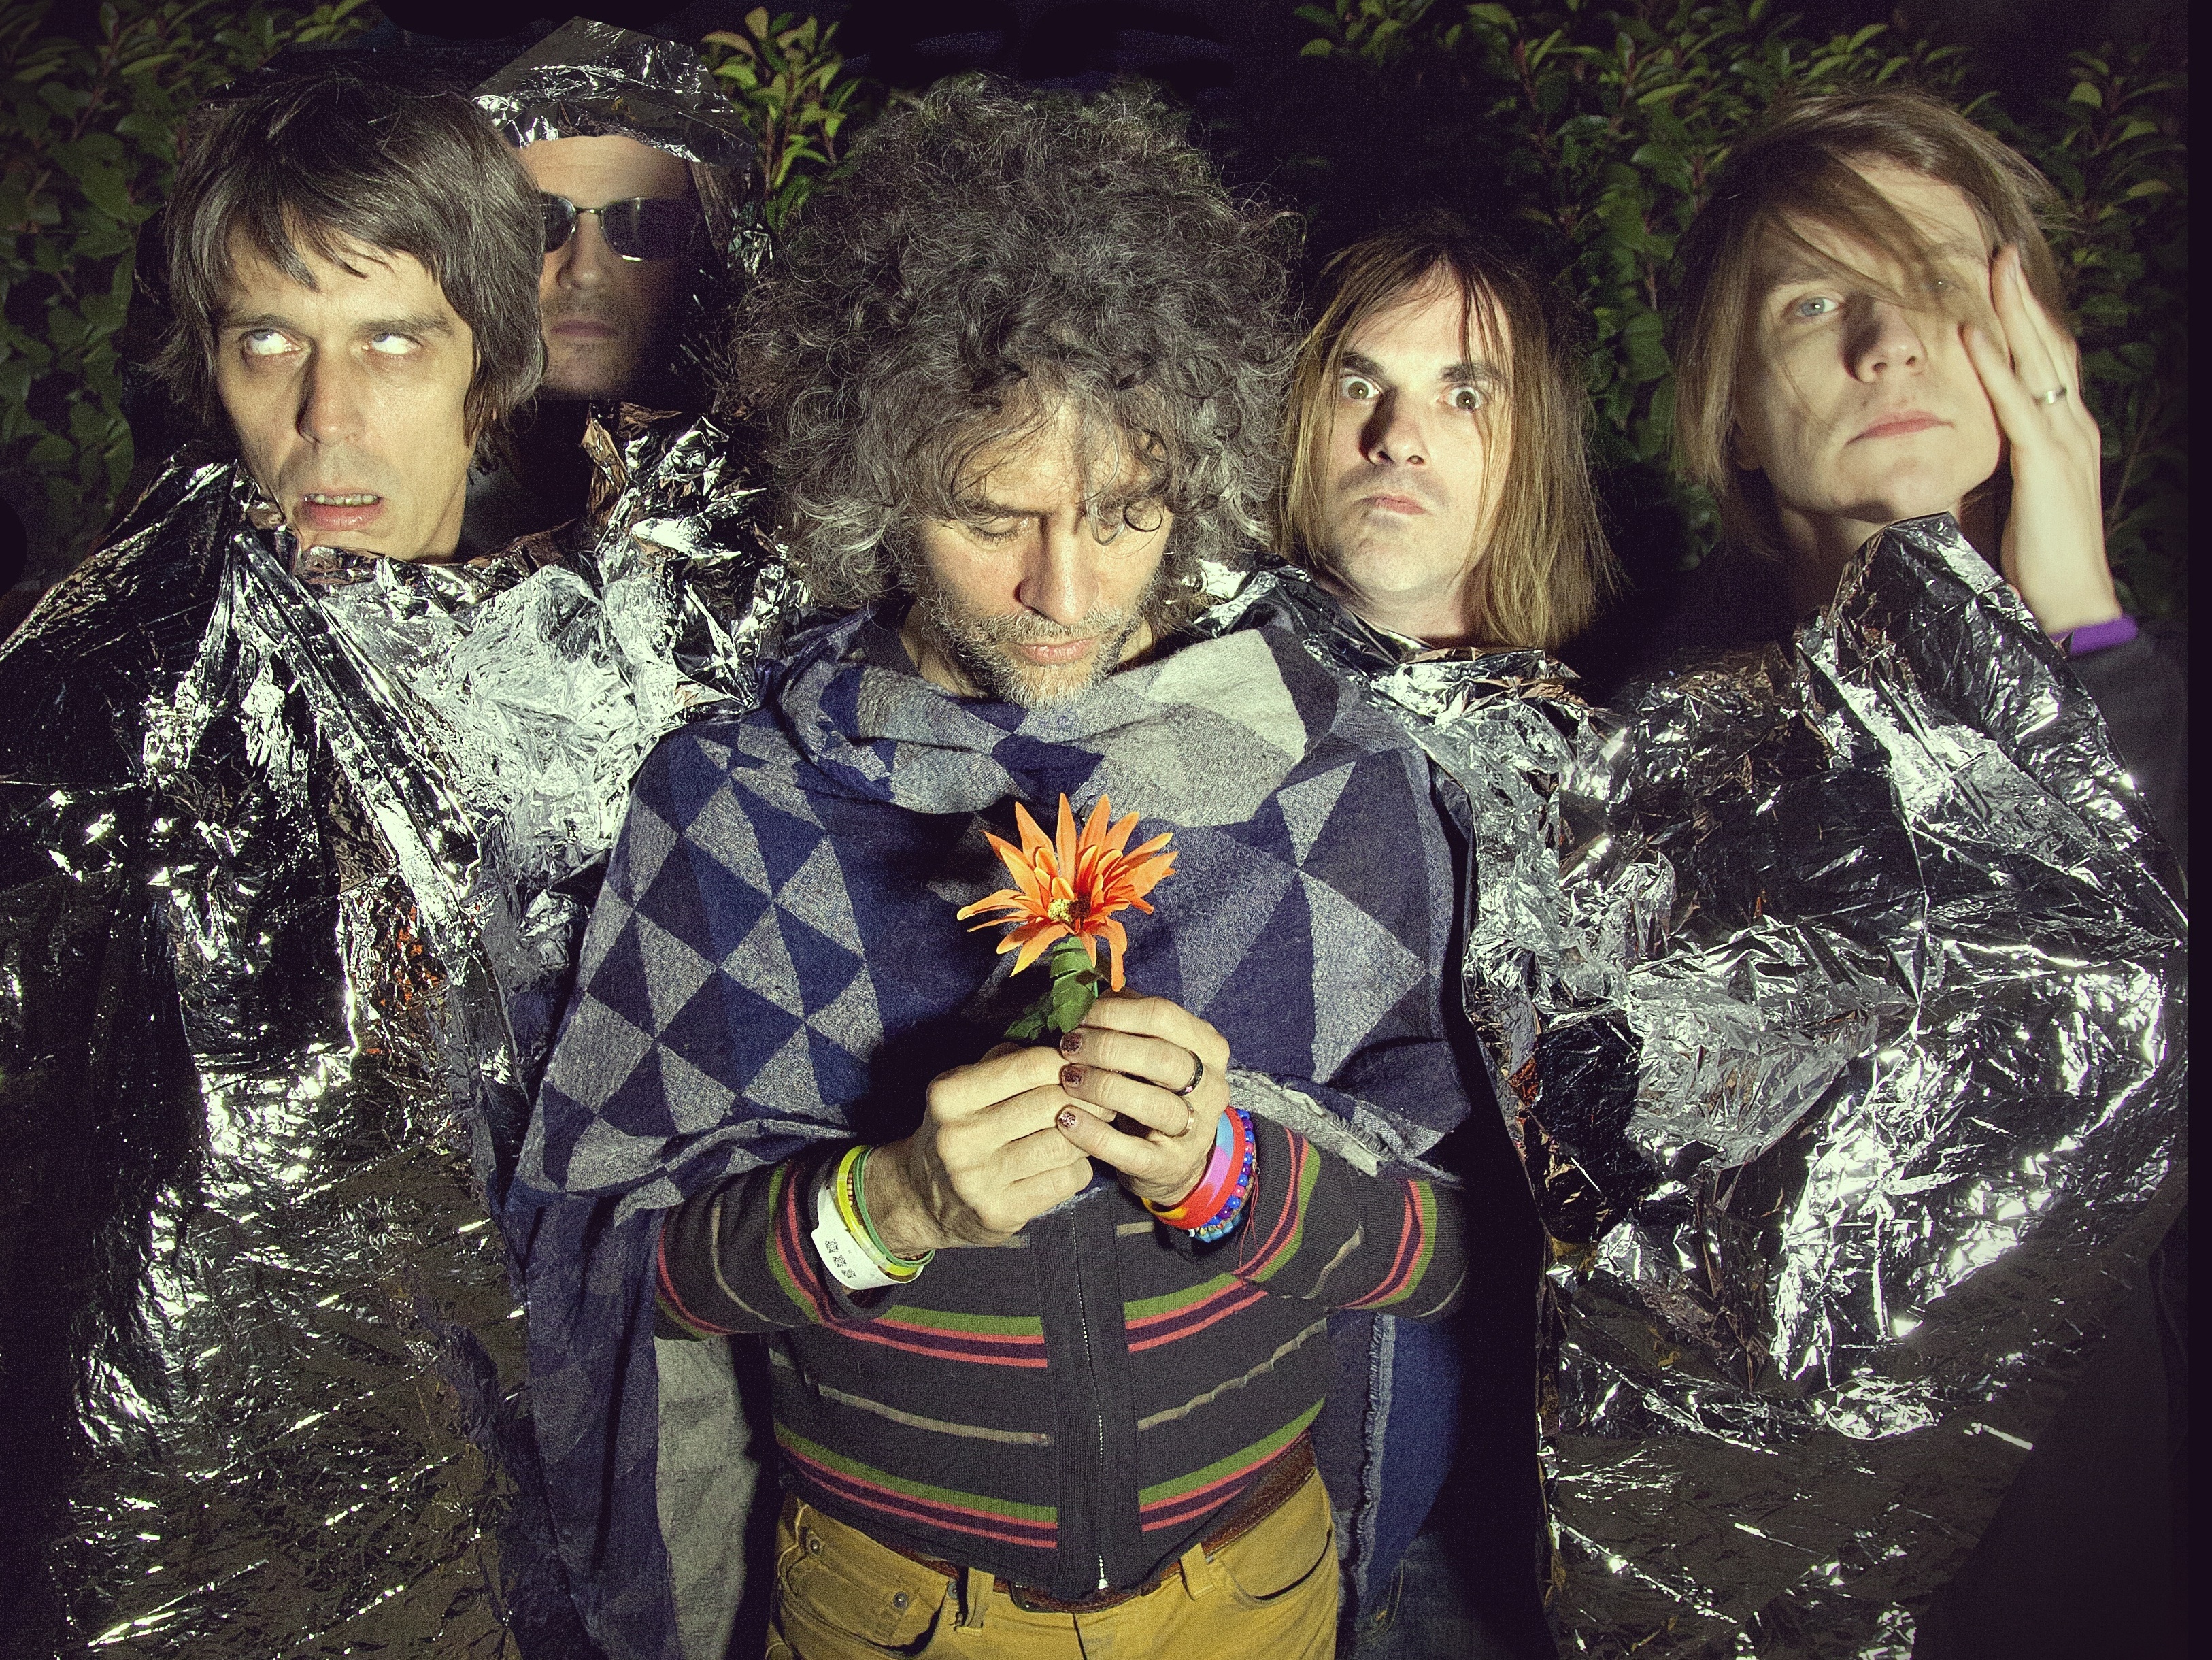 The Flaming Lips' new album, The Terror, is out now. (George Salisbury/Courtesy of the artist)